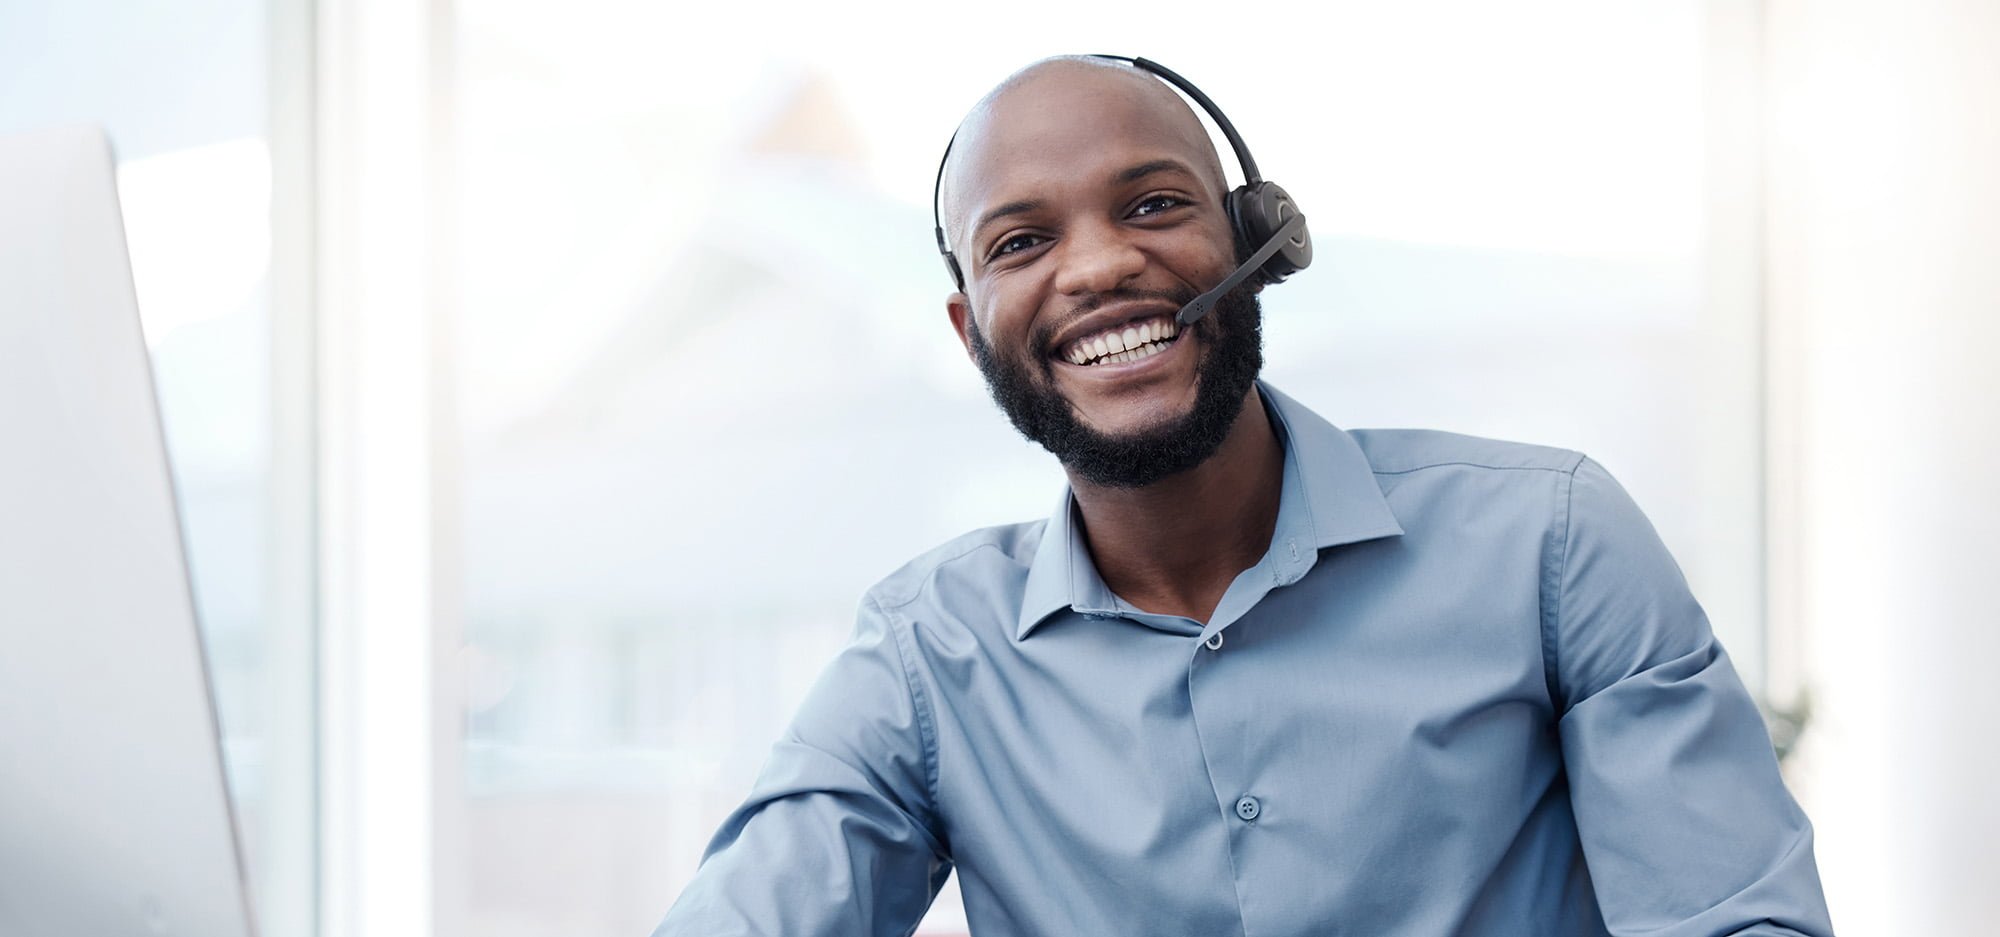 man smiling while using a headset at a desk